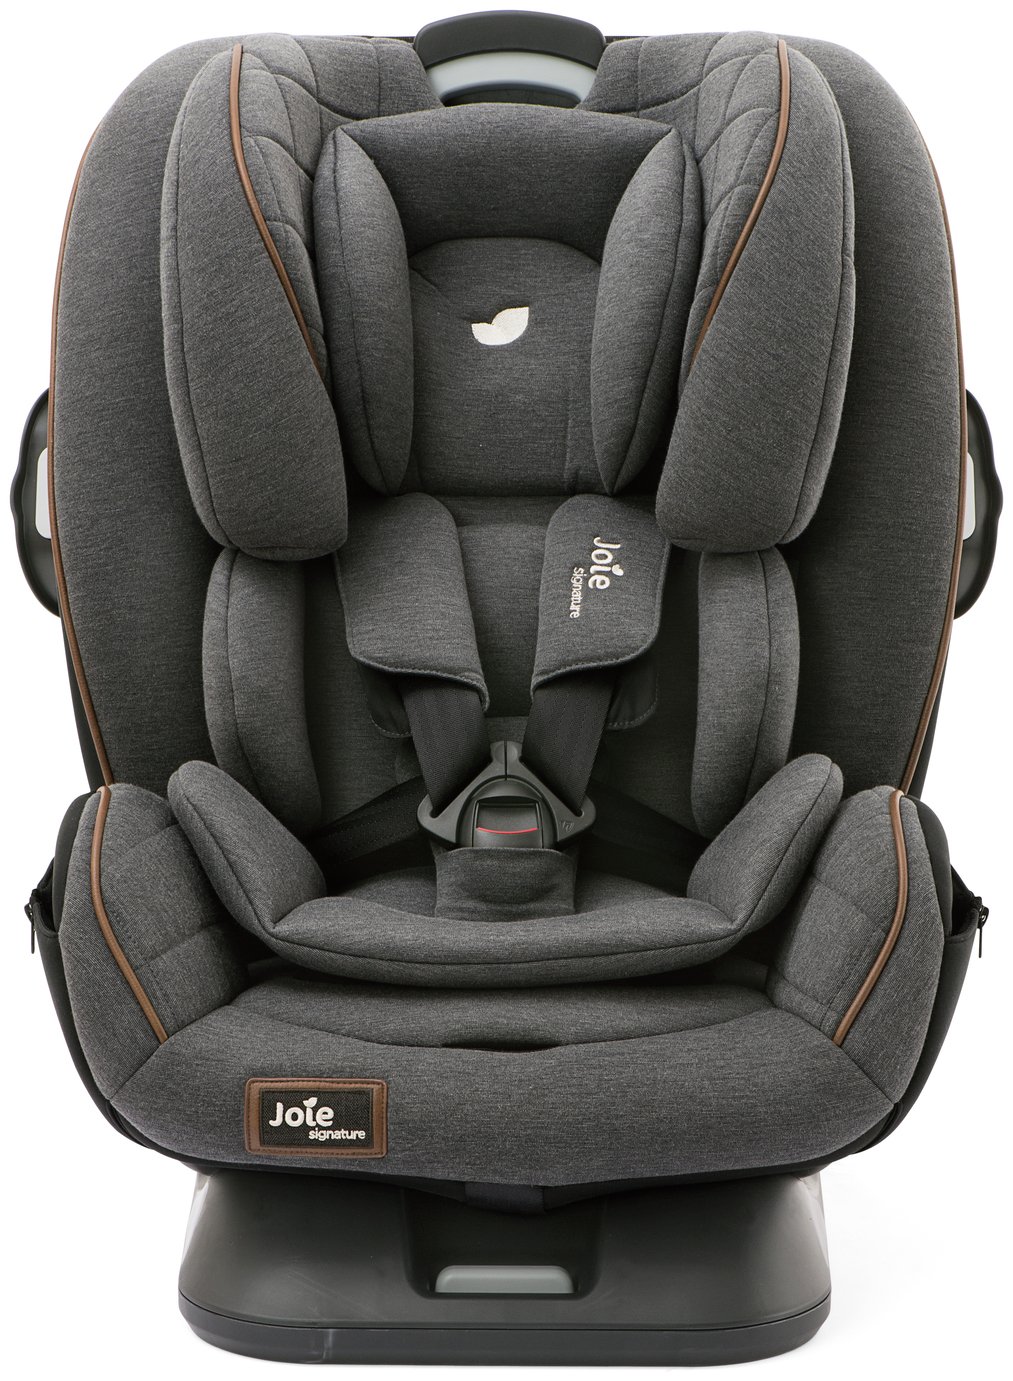 Joie Signature Every Stage FX Car Seat Reviews